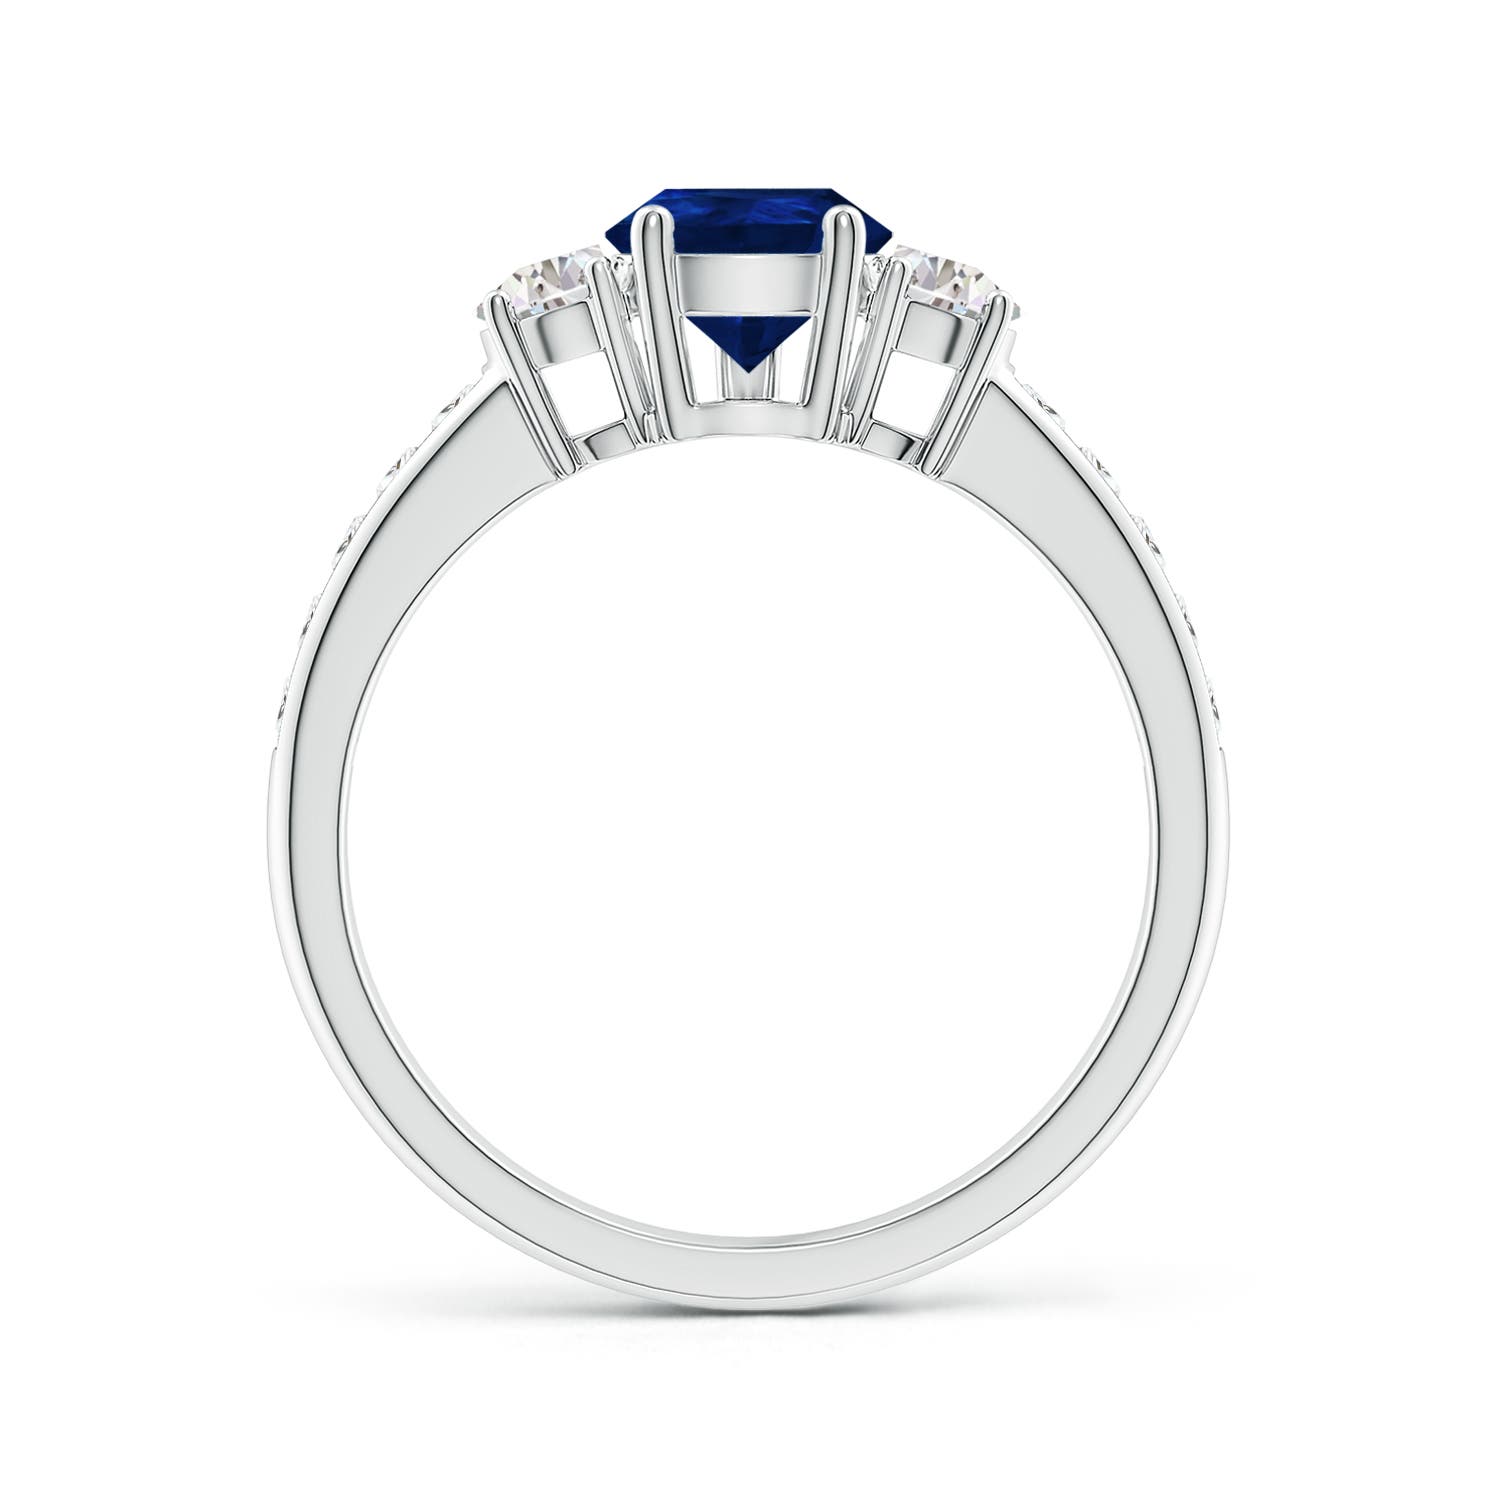 AA - Blue Sapphire / 2.01 CT / 14 KT White Gold